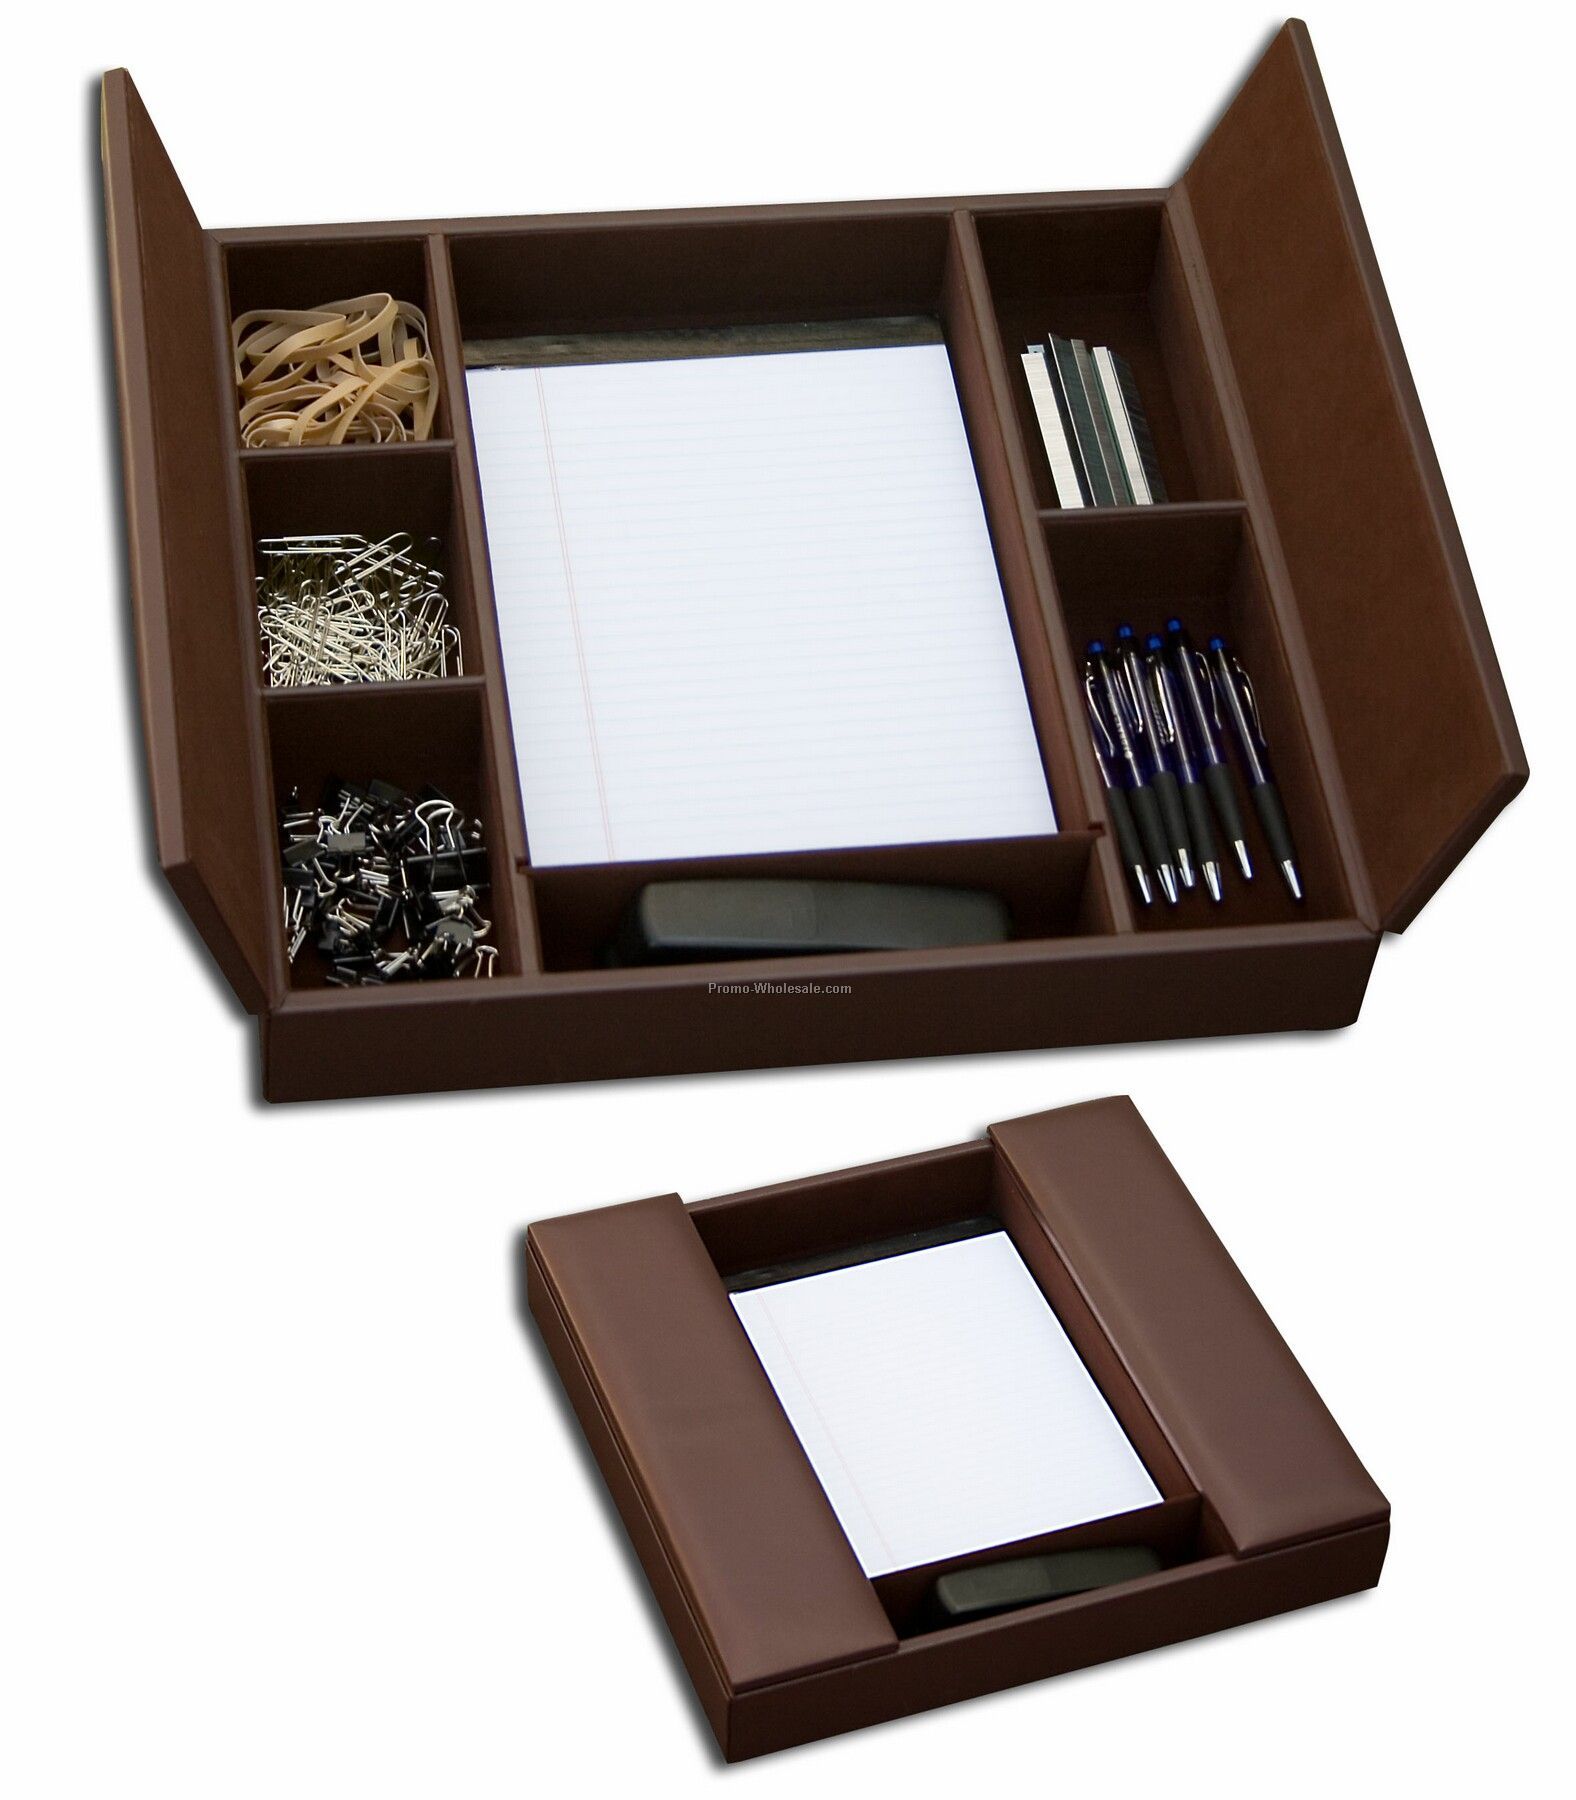 Conference Room Organizer - Rustic Brown Top Grain Leather